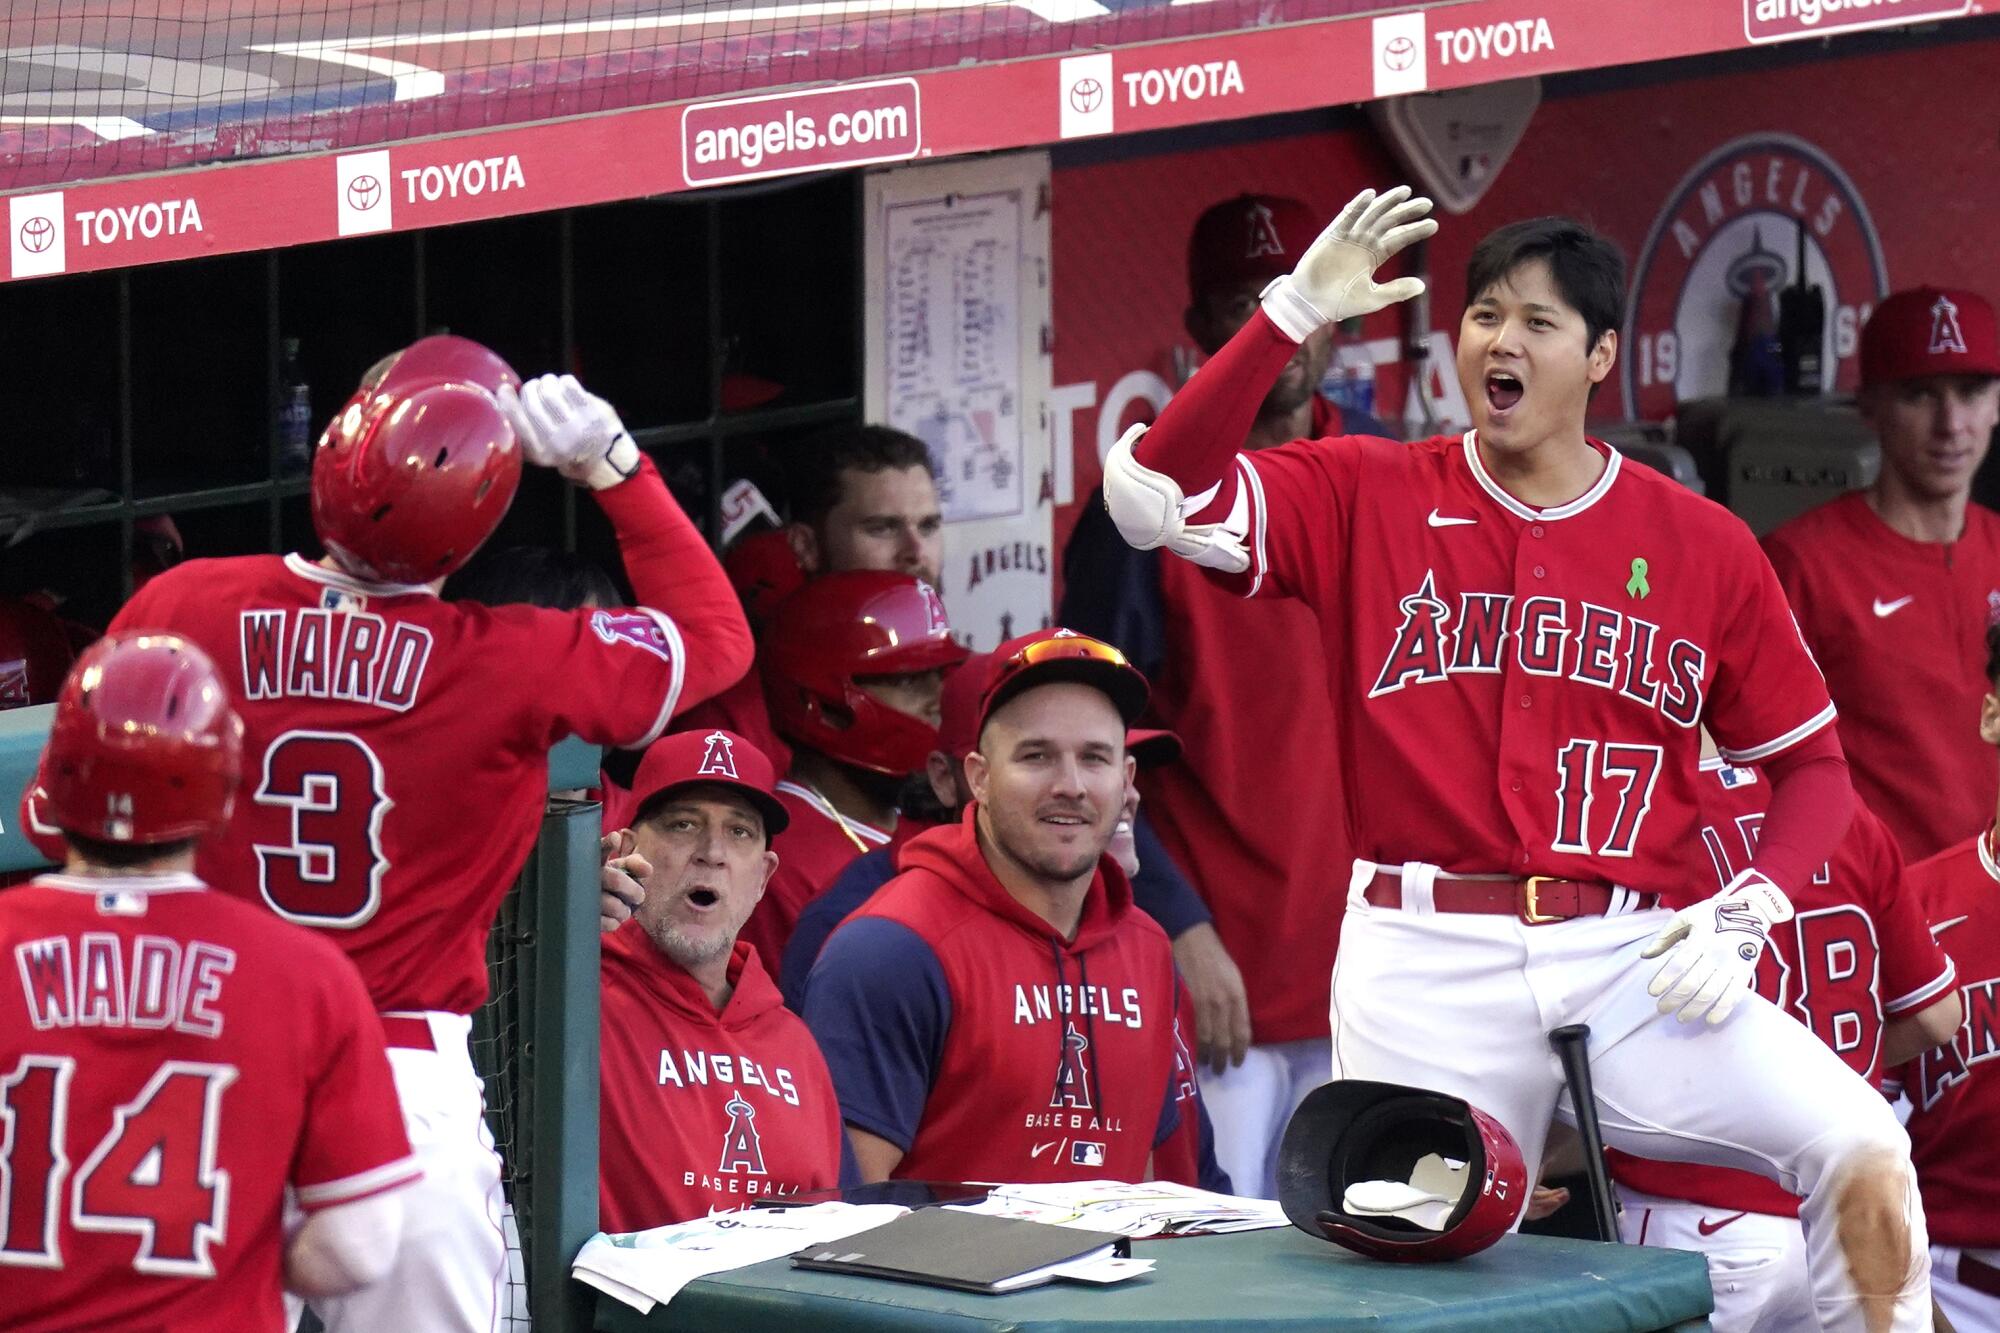 Angels star Shohei Ohtani raises his right arm as he's about to slap hands with teammate Taylor Ward, who hit a home run.